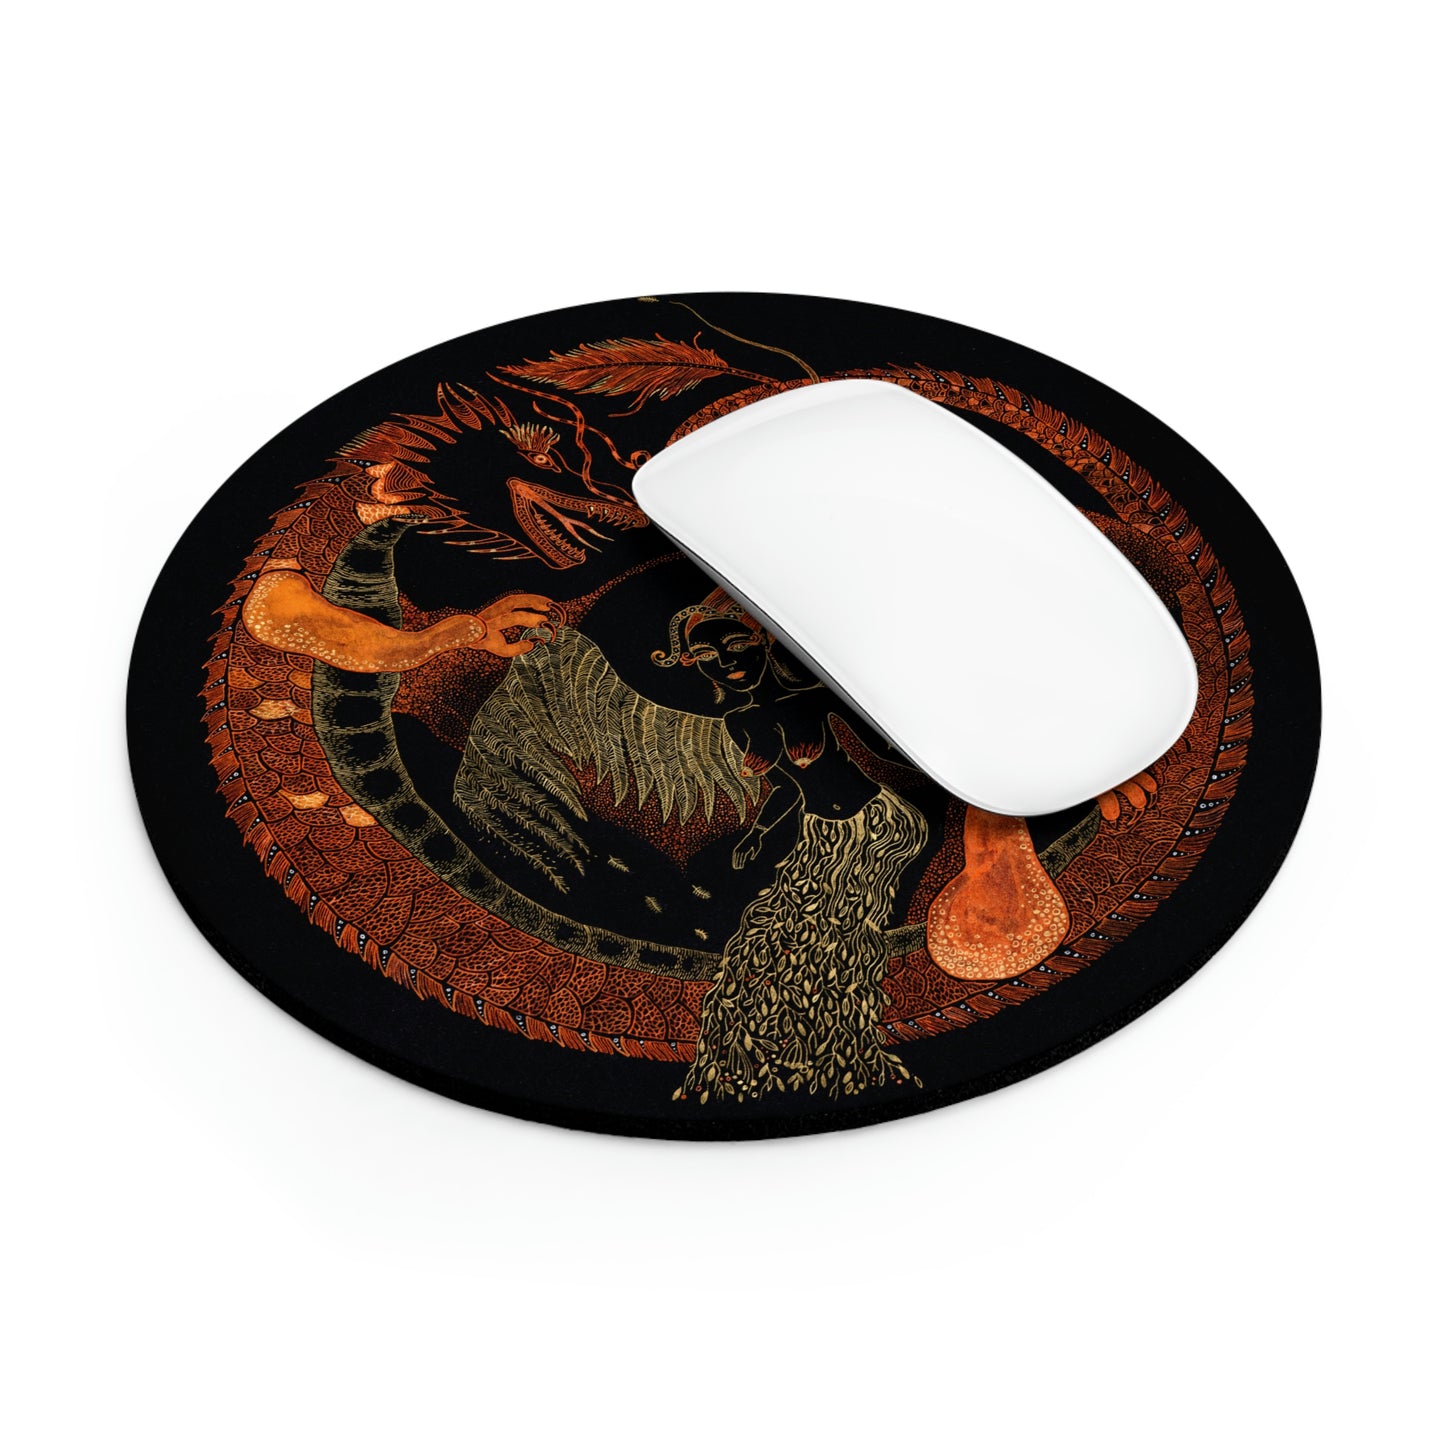 Chinese Zodiac Sign Mouse Pad (Dragon)